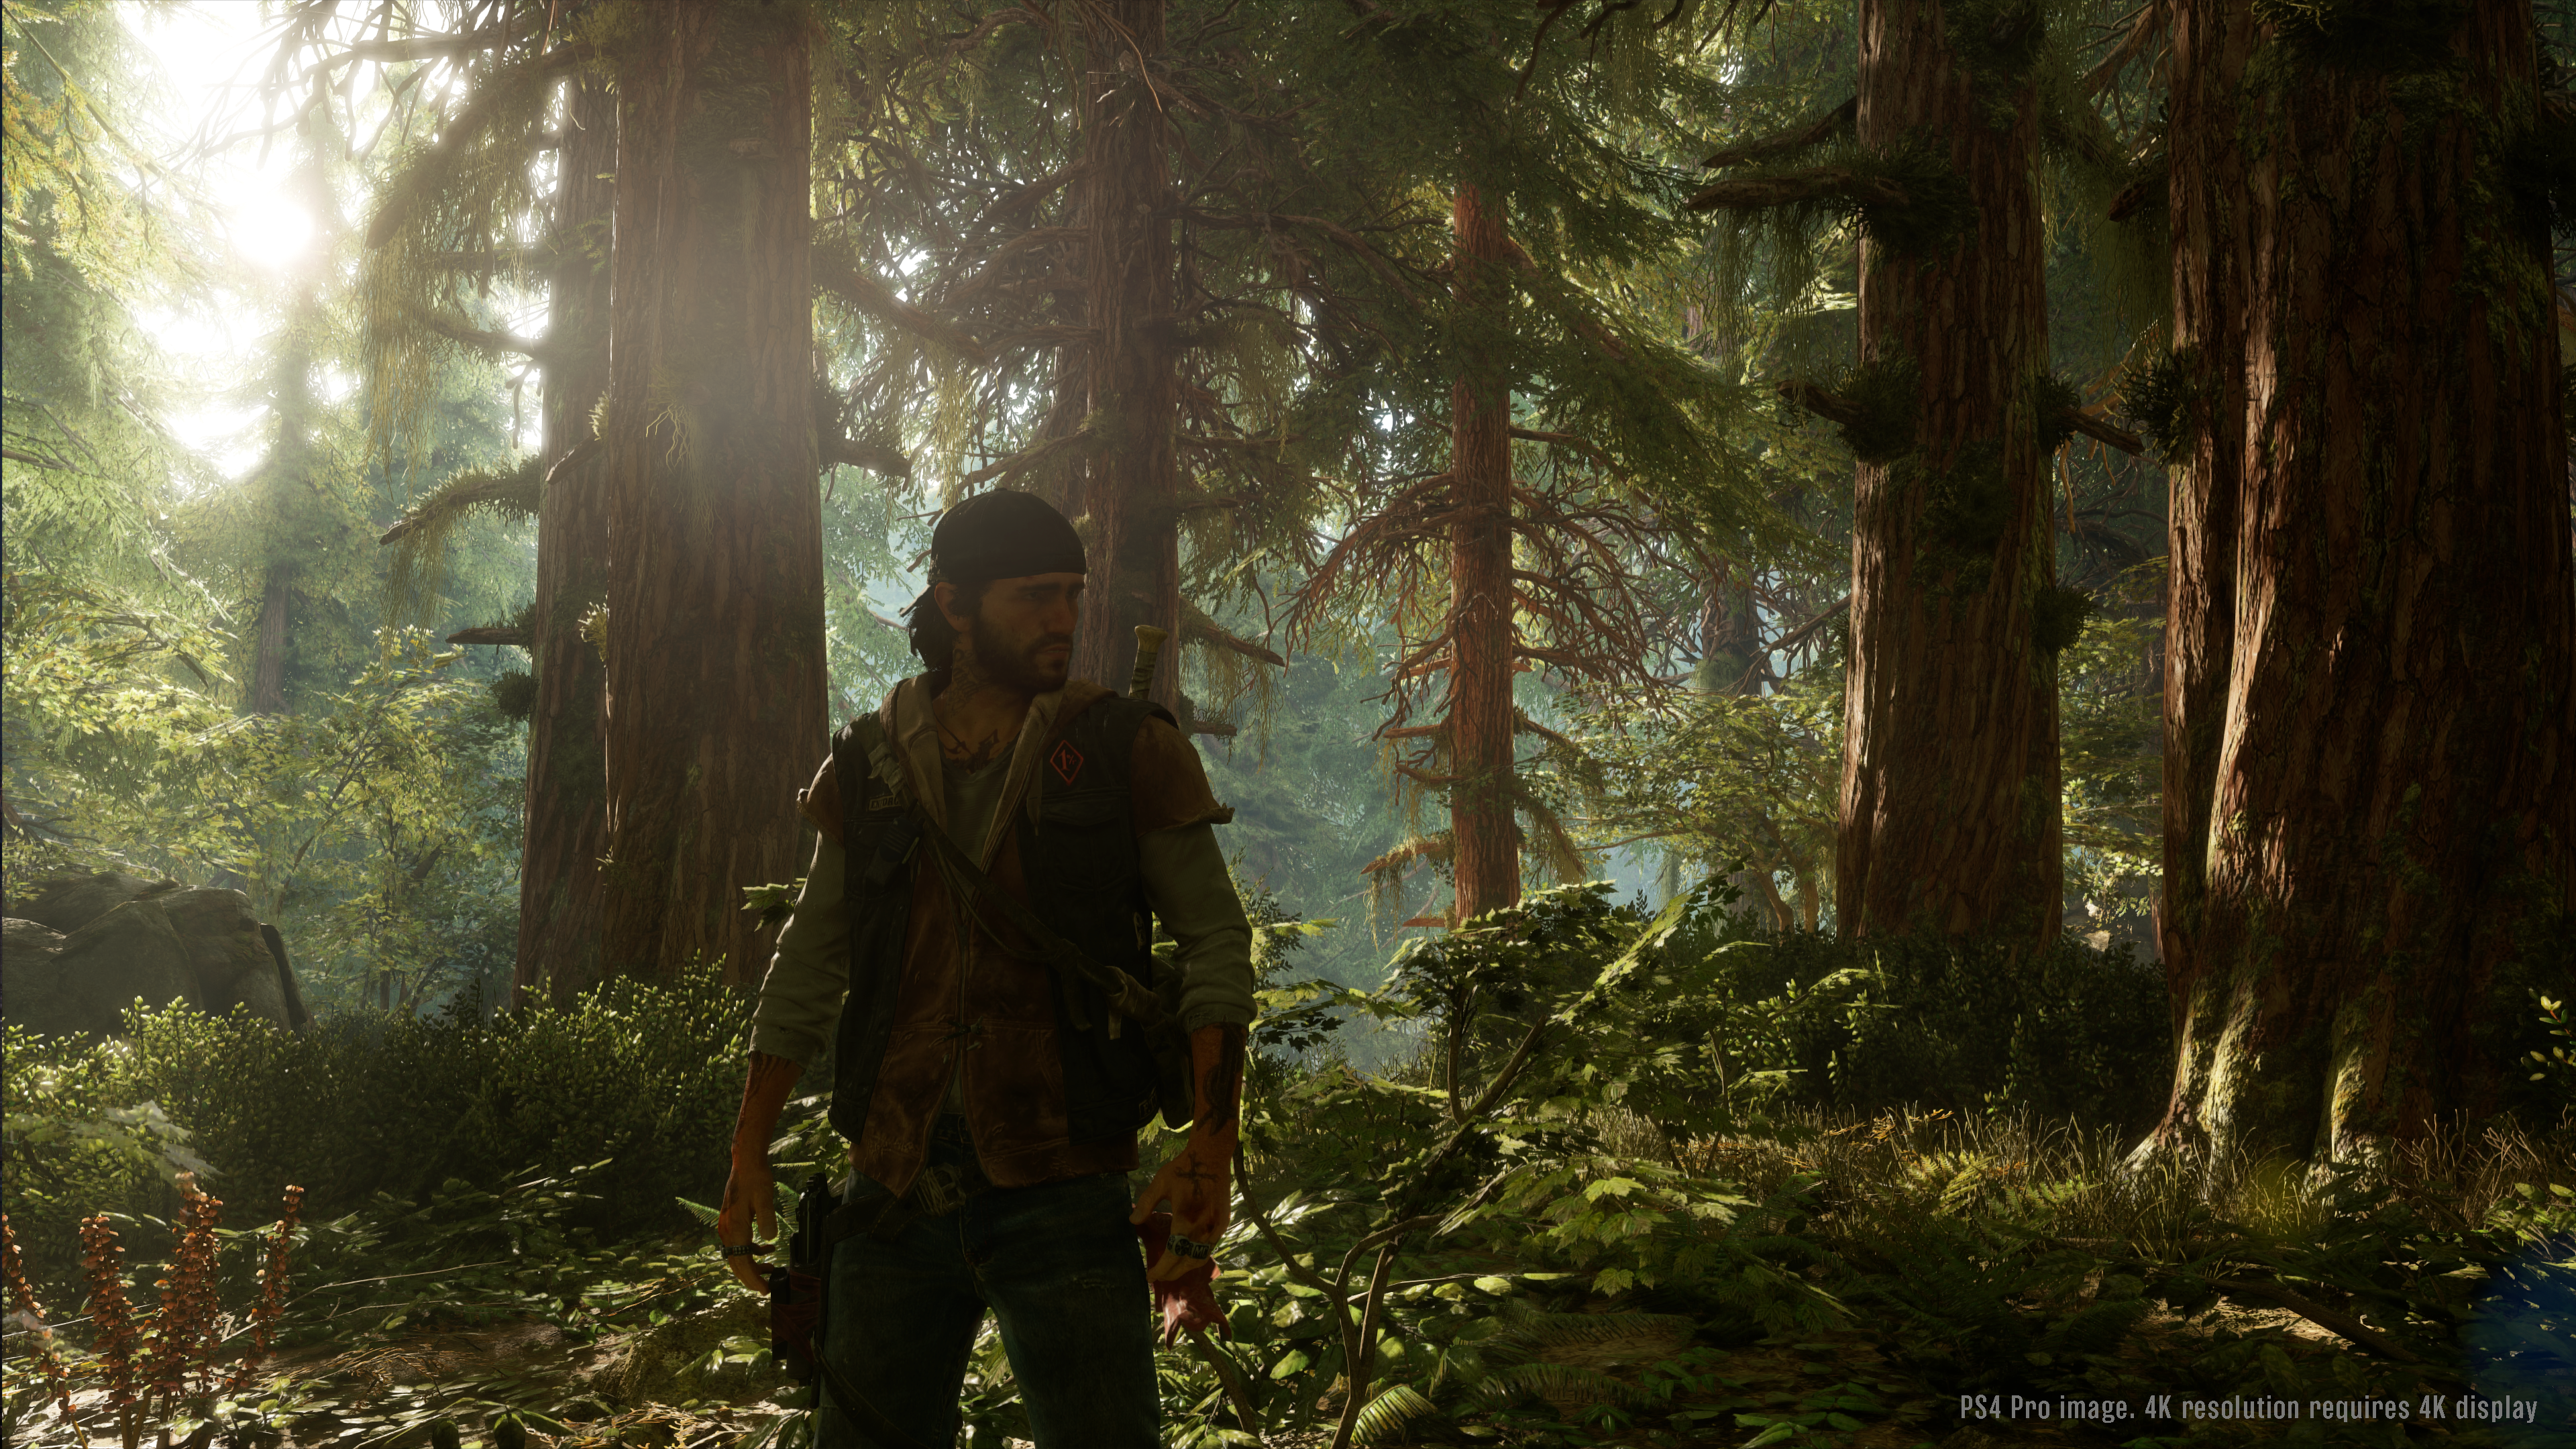 New 'Days Gone' Trailer “This World Comes For You” Confirms Release Date